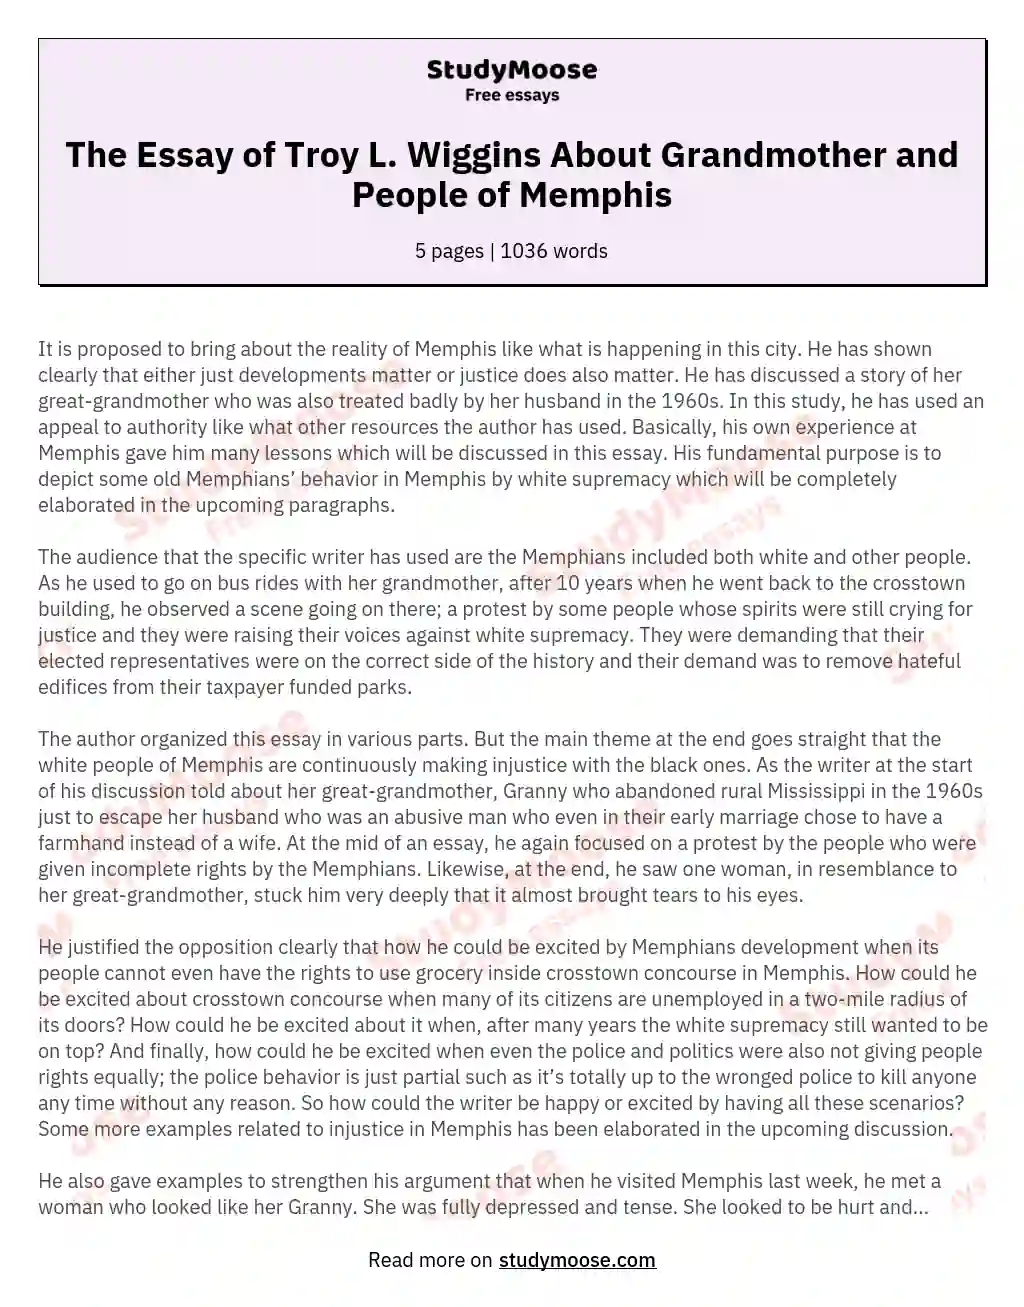 The Essay of Troy L. Wiggins About Grandmother and People of Memphis essay